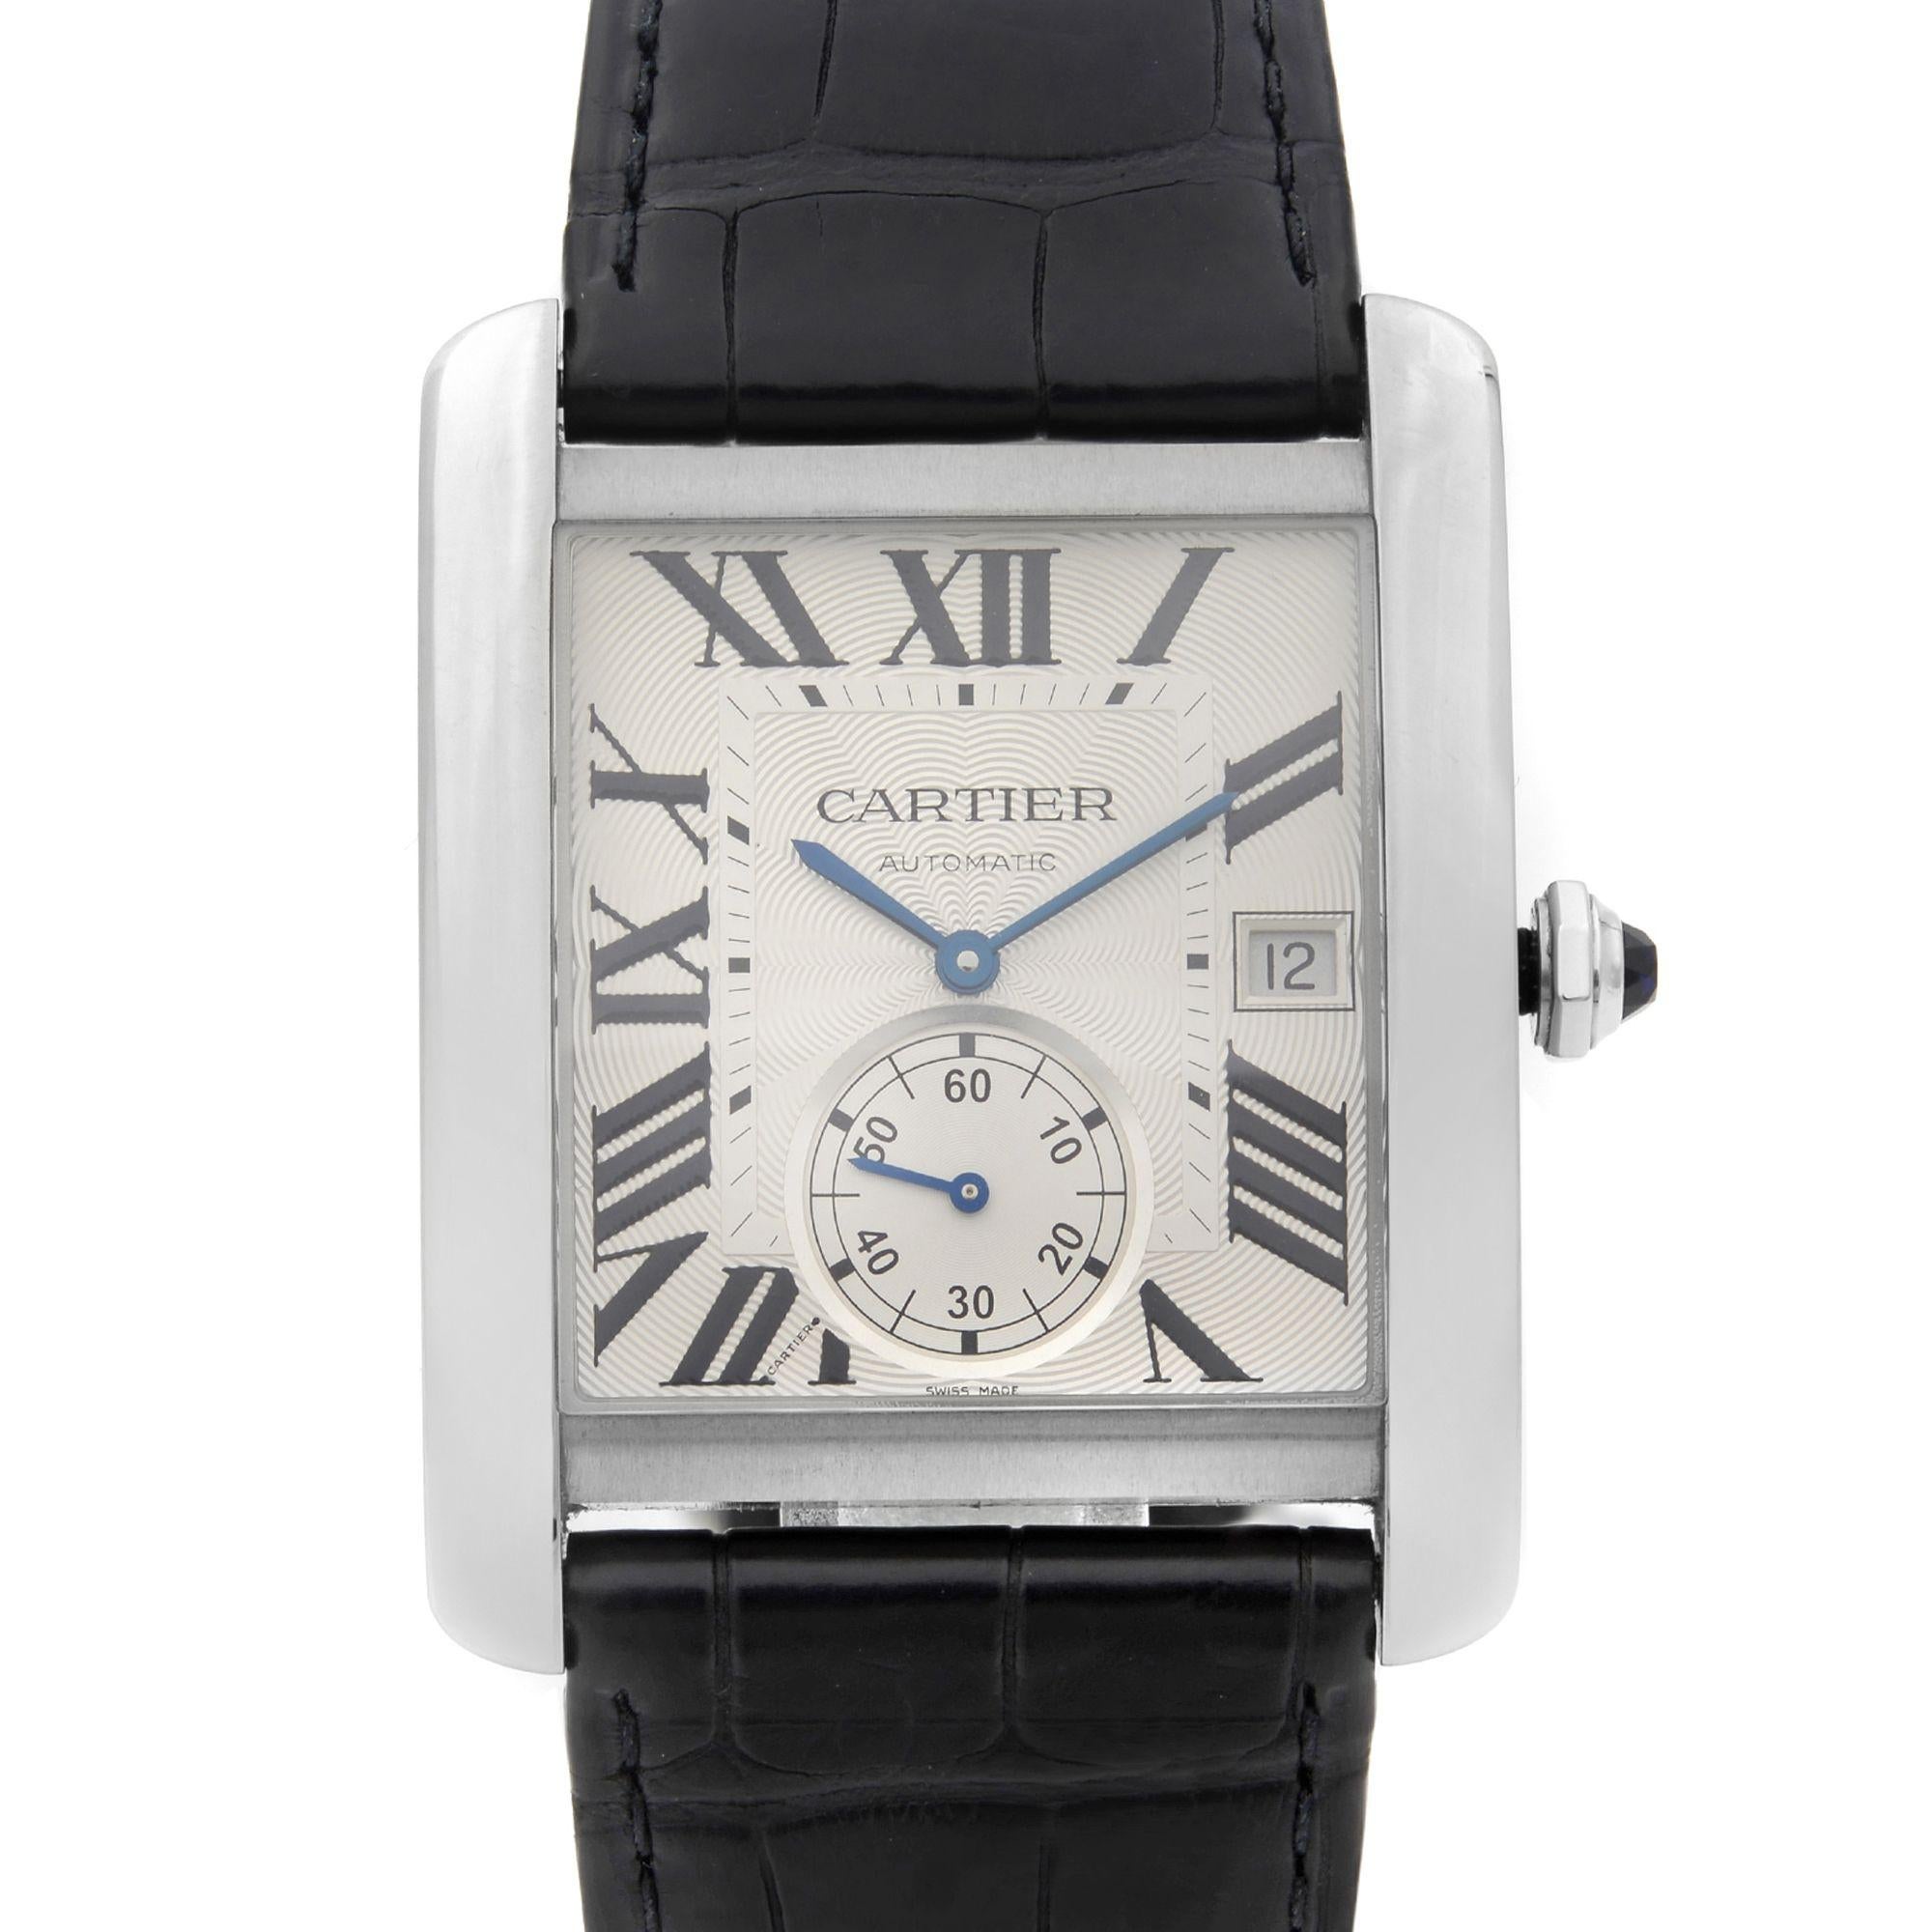 This pre-owned Cartier Tank MC W5330003 is a beautiful men's timepiece that is powered by mechanical (automatic) movement which is cased in a stainless steel case. It has a  rectangle shape face, date indicator, small seconds subdial dial and has